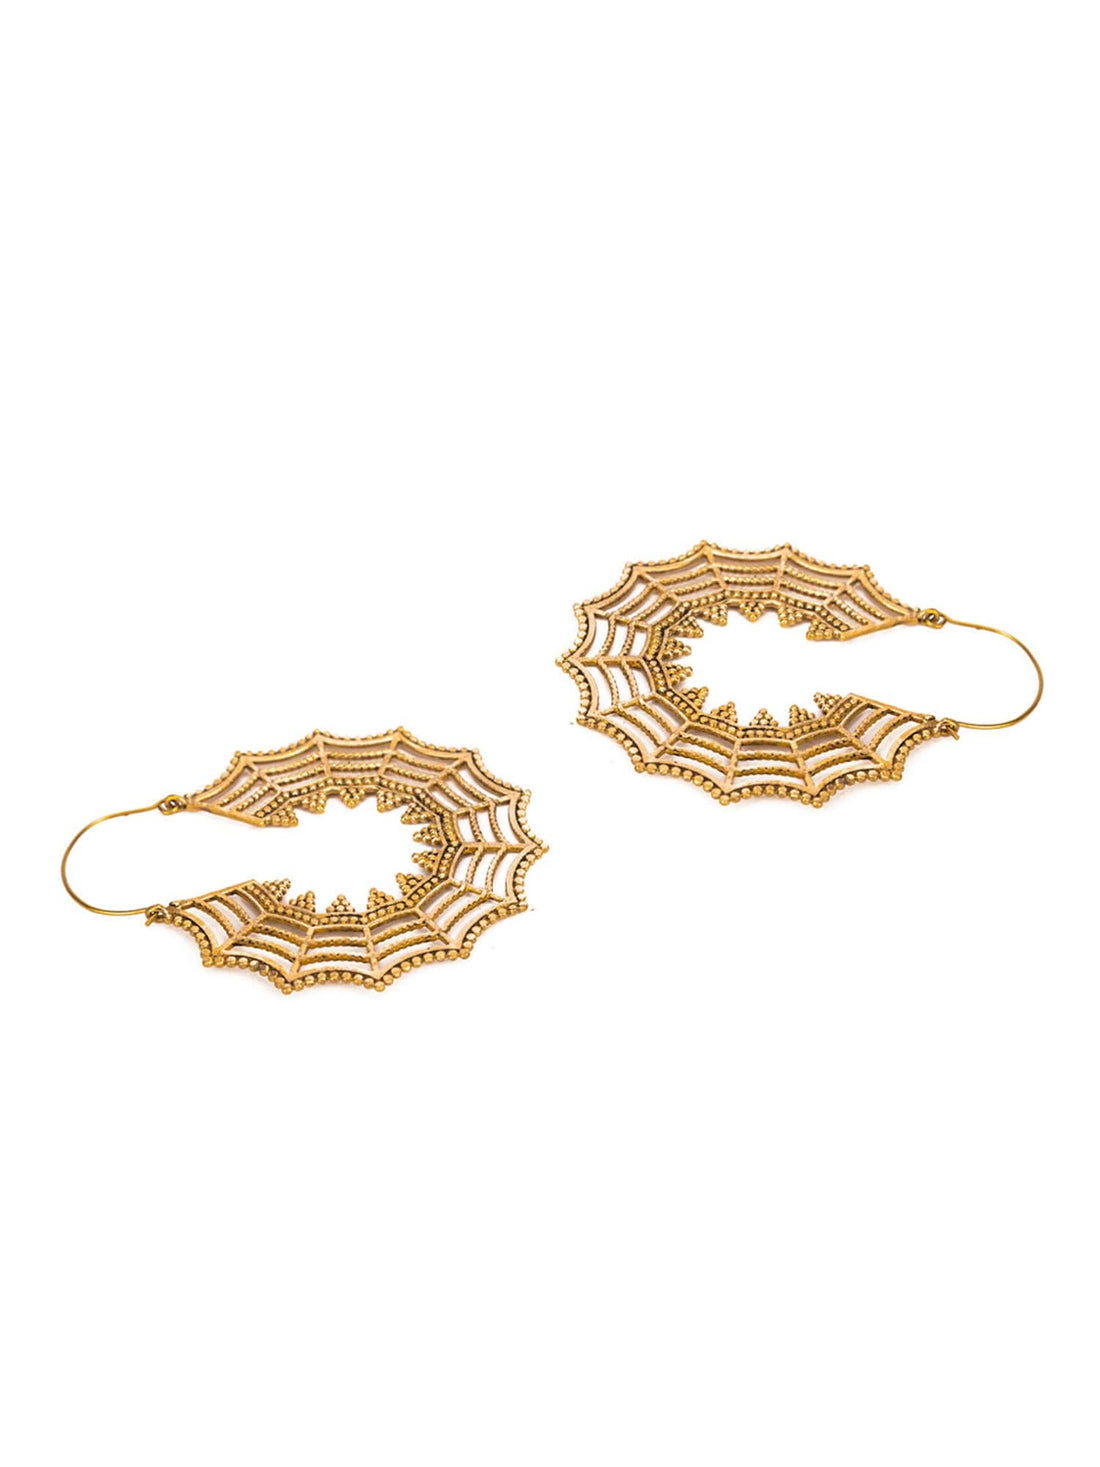 Party Wear Hoops Earrings - Artistic Expression Gold and Silver-Plated Brass Earrings By Studio One Love